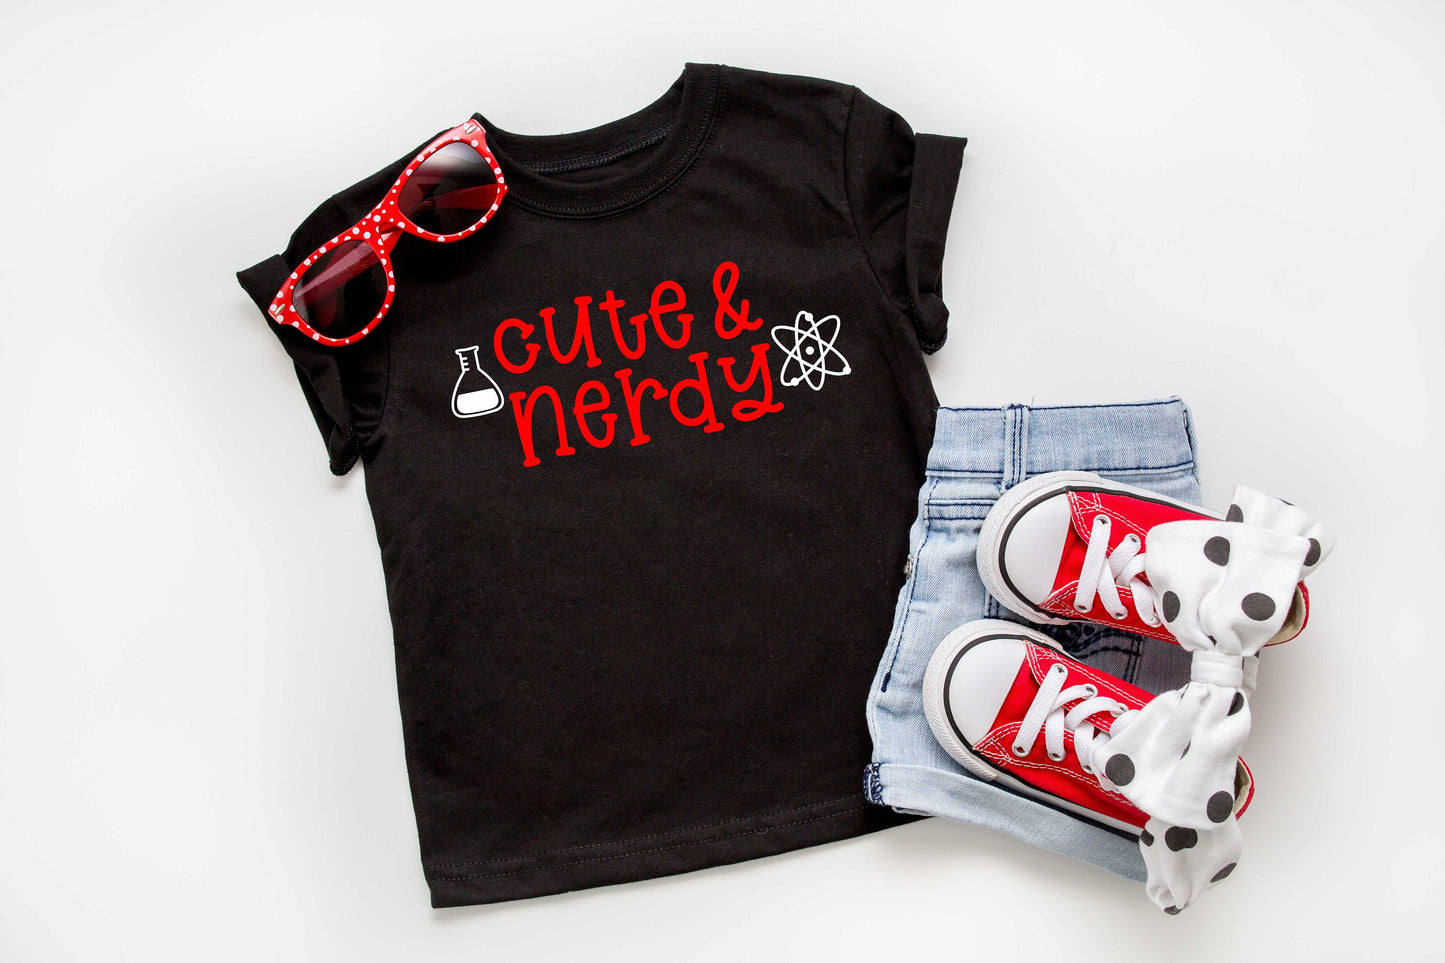 Cute and Nerdy Infant, Toddler or Kids Shirt or Bodysuit - nerdy kids shirt - science shirt - nerdy baby - geeky kid's shirt - nerdy t-shirt